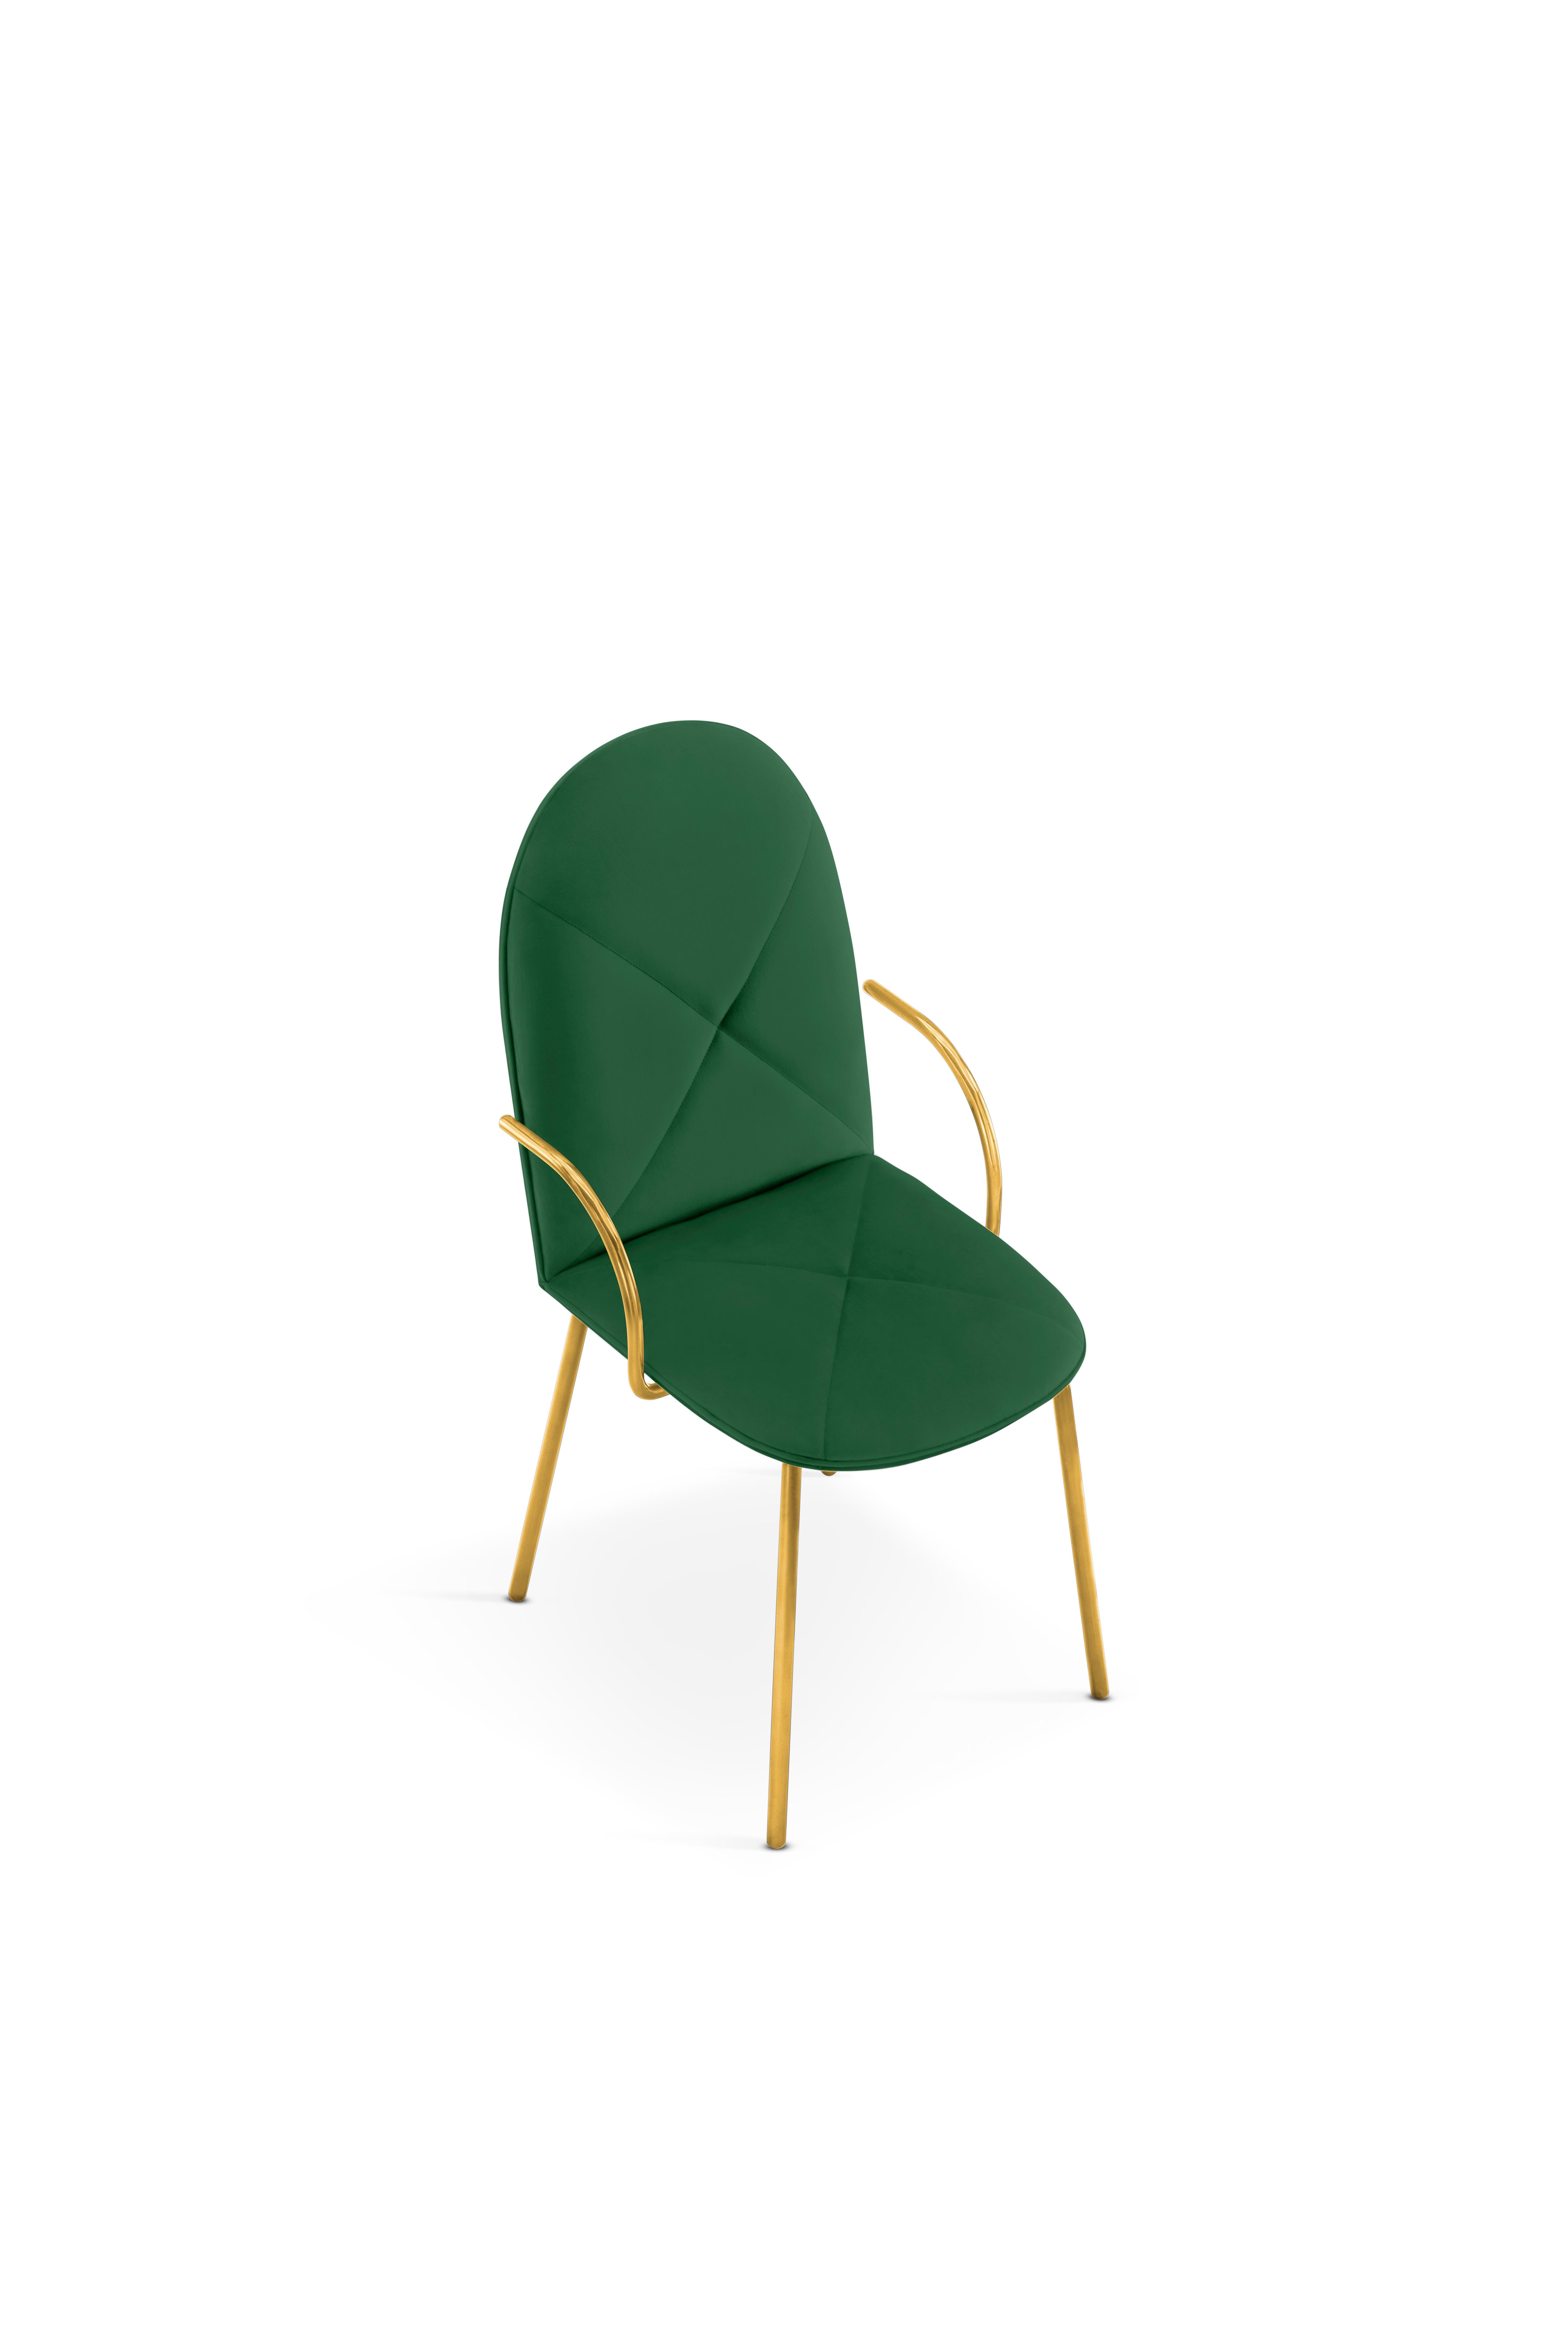 Modern Orion Dining Chair with Plush Green Velvet and Gold Arms by Nika Zupanc For Sale